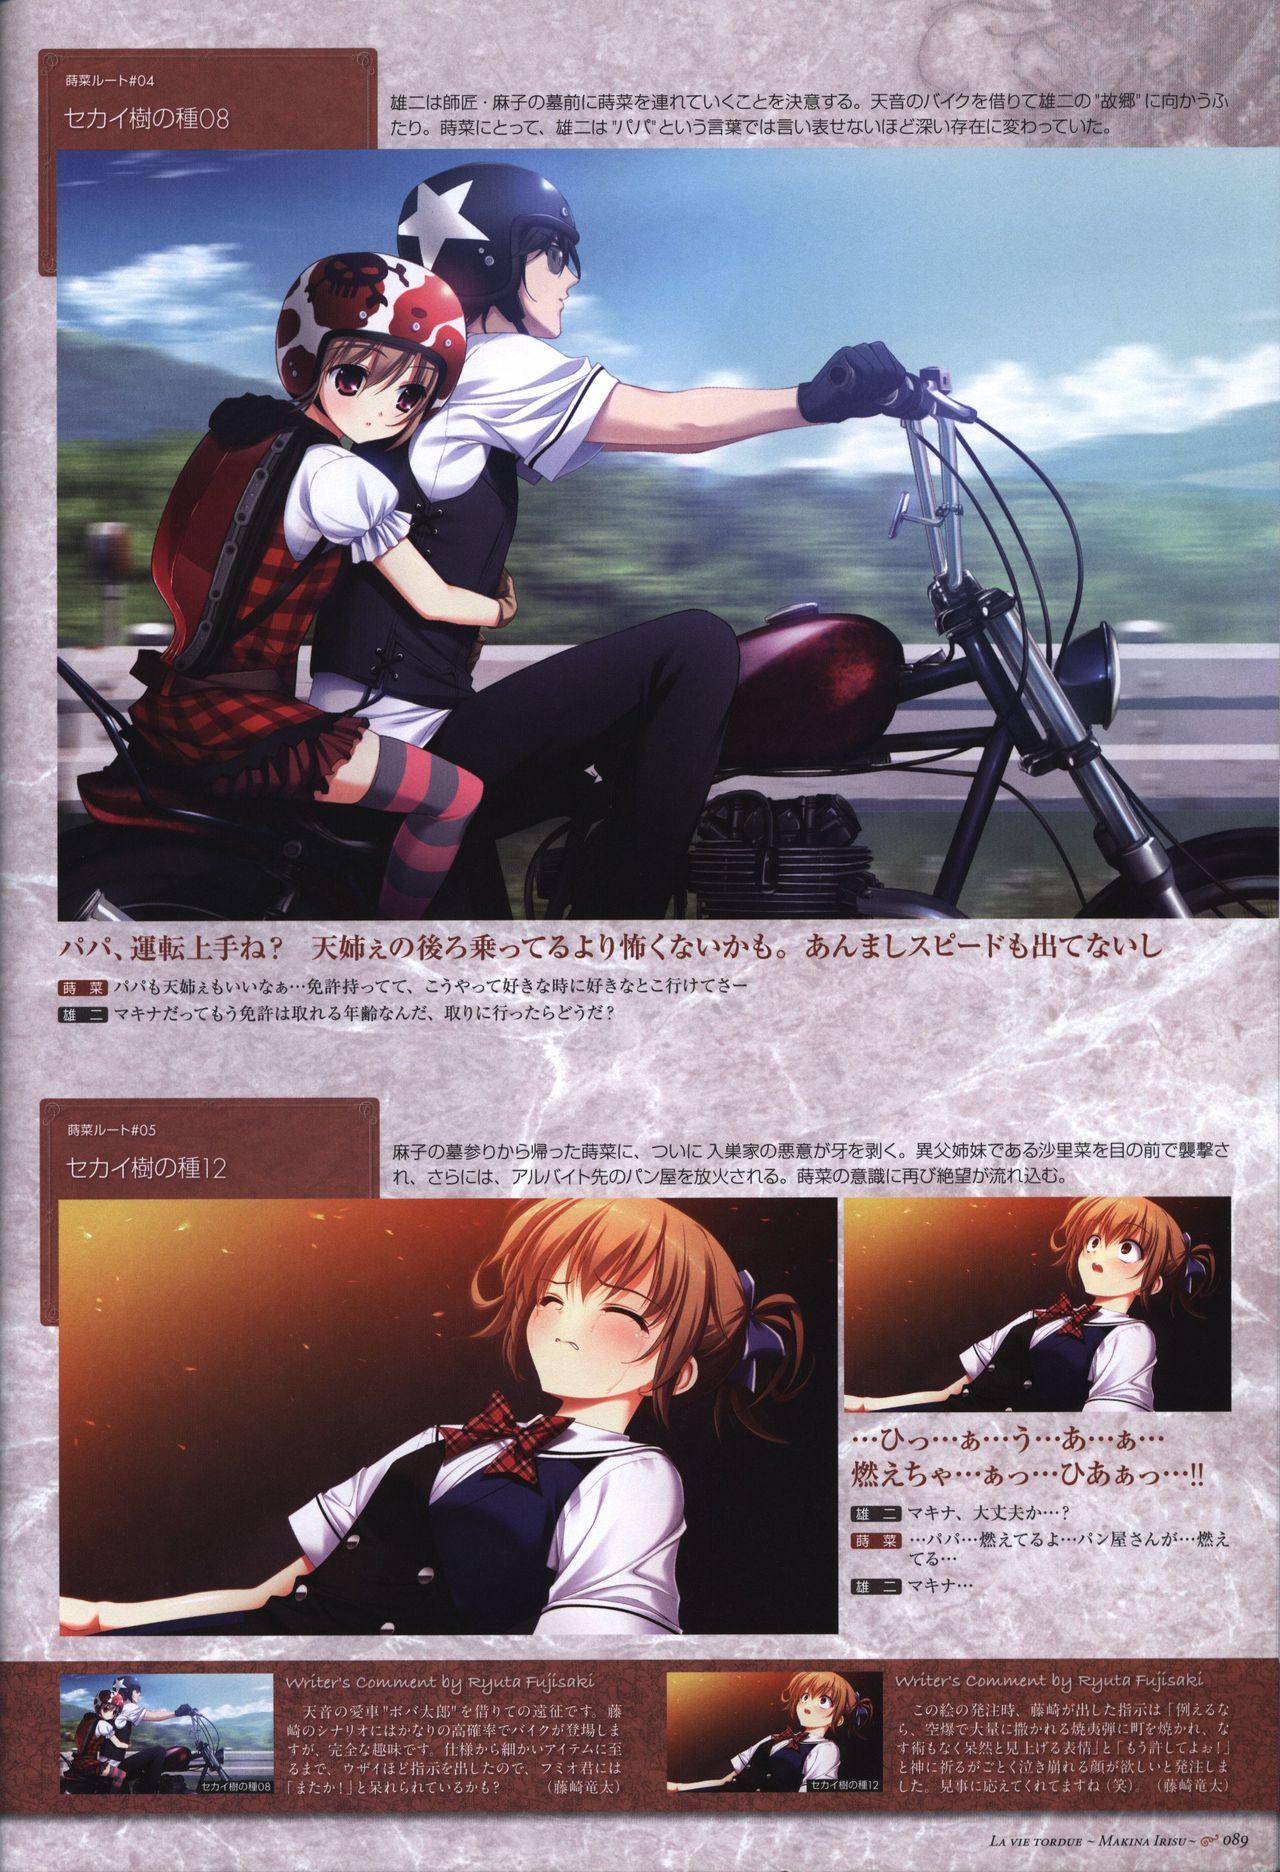 The Fruit of Grisaia Visual FanBook 89